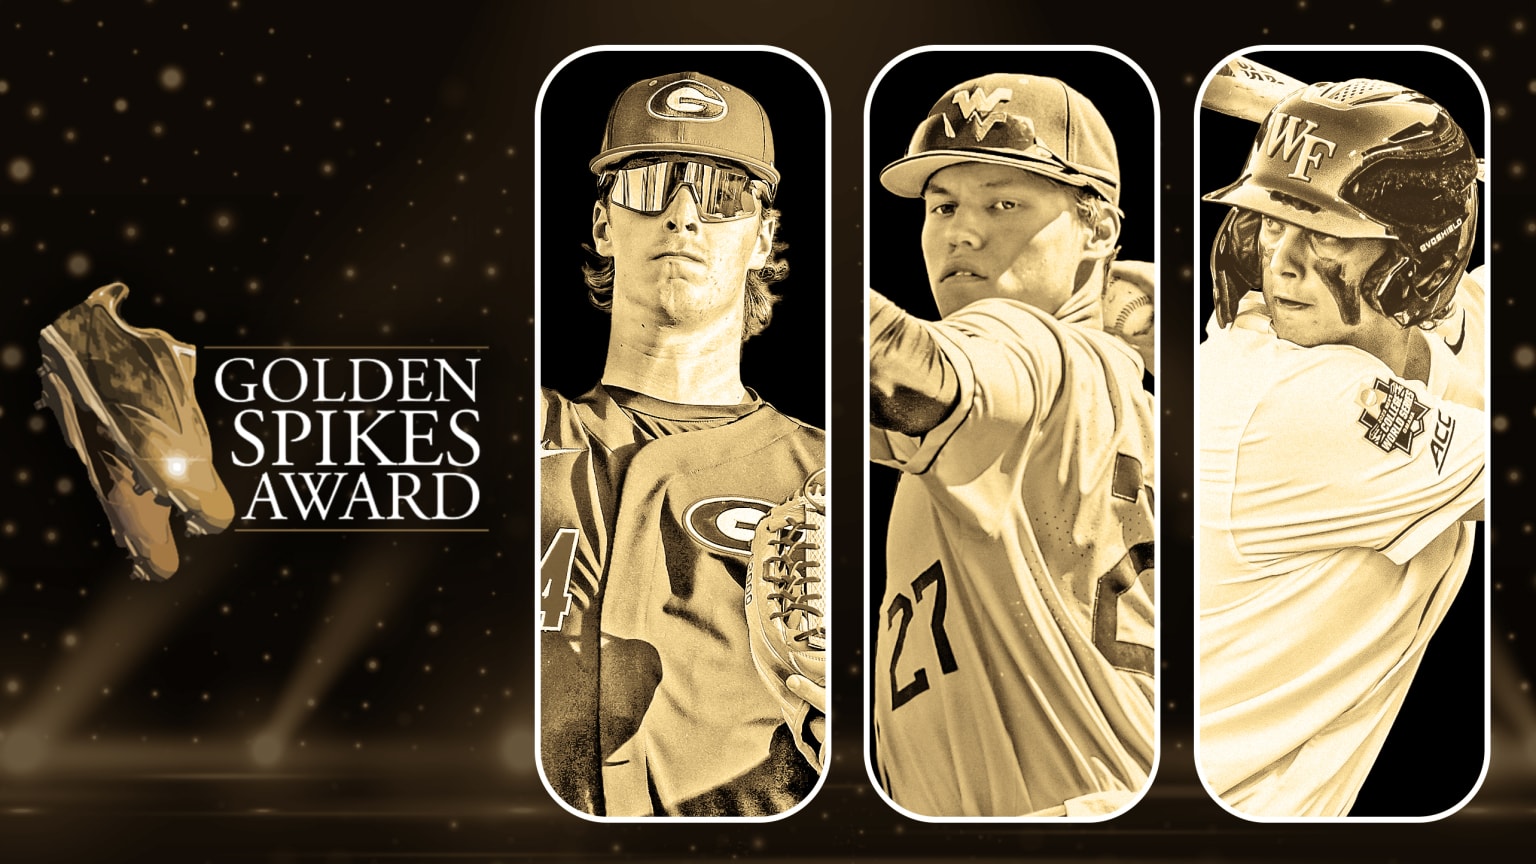 Image with three candidates for Golden Spikes Award